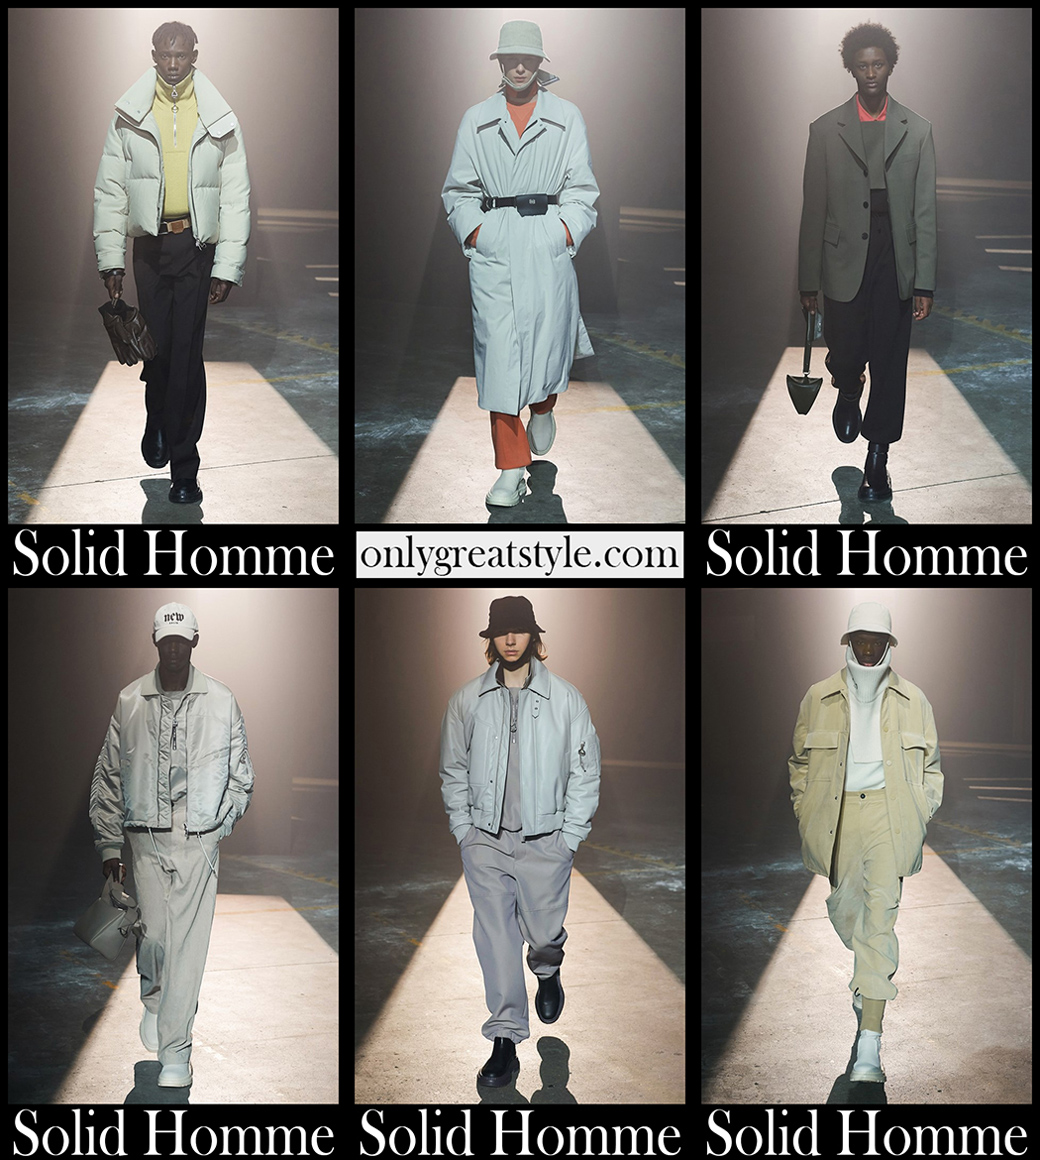 Fashion Solid Homme fall winter 2021 2022 mens clothing